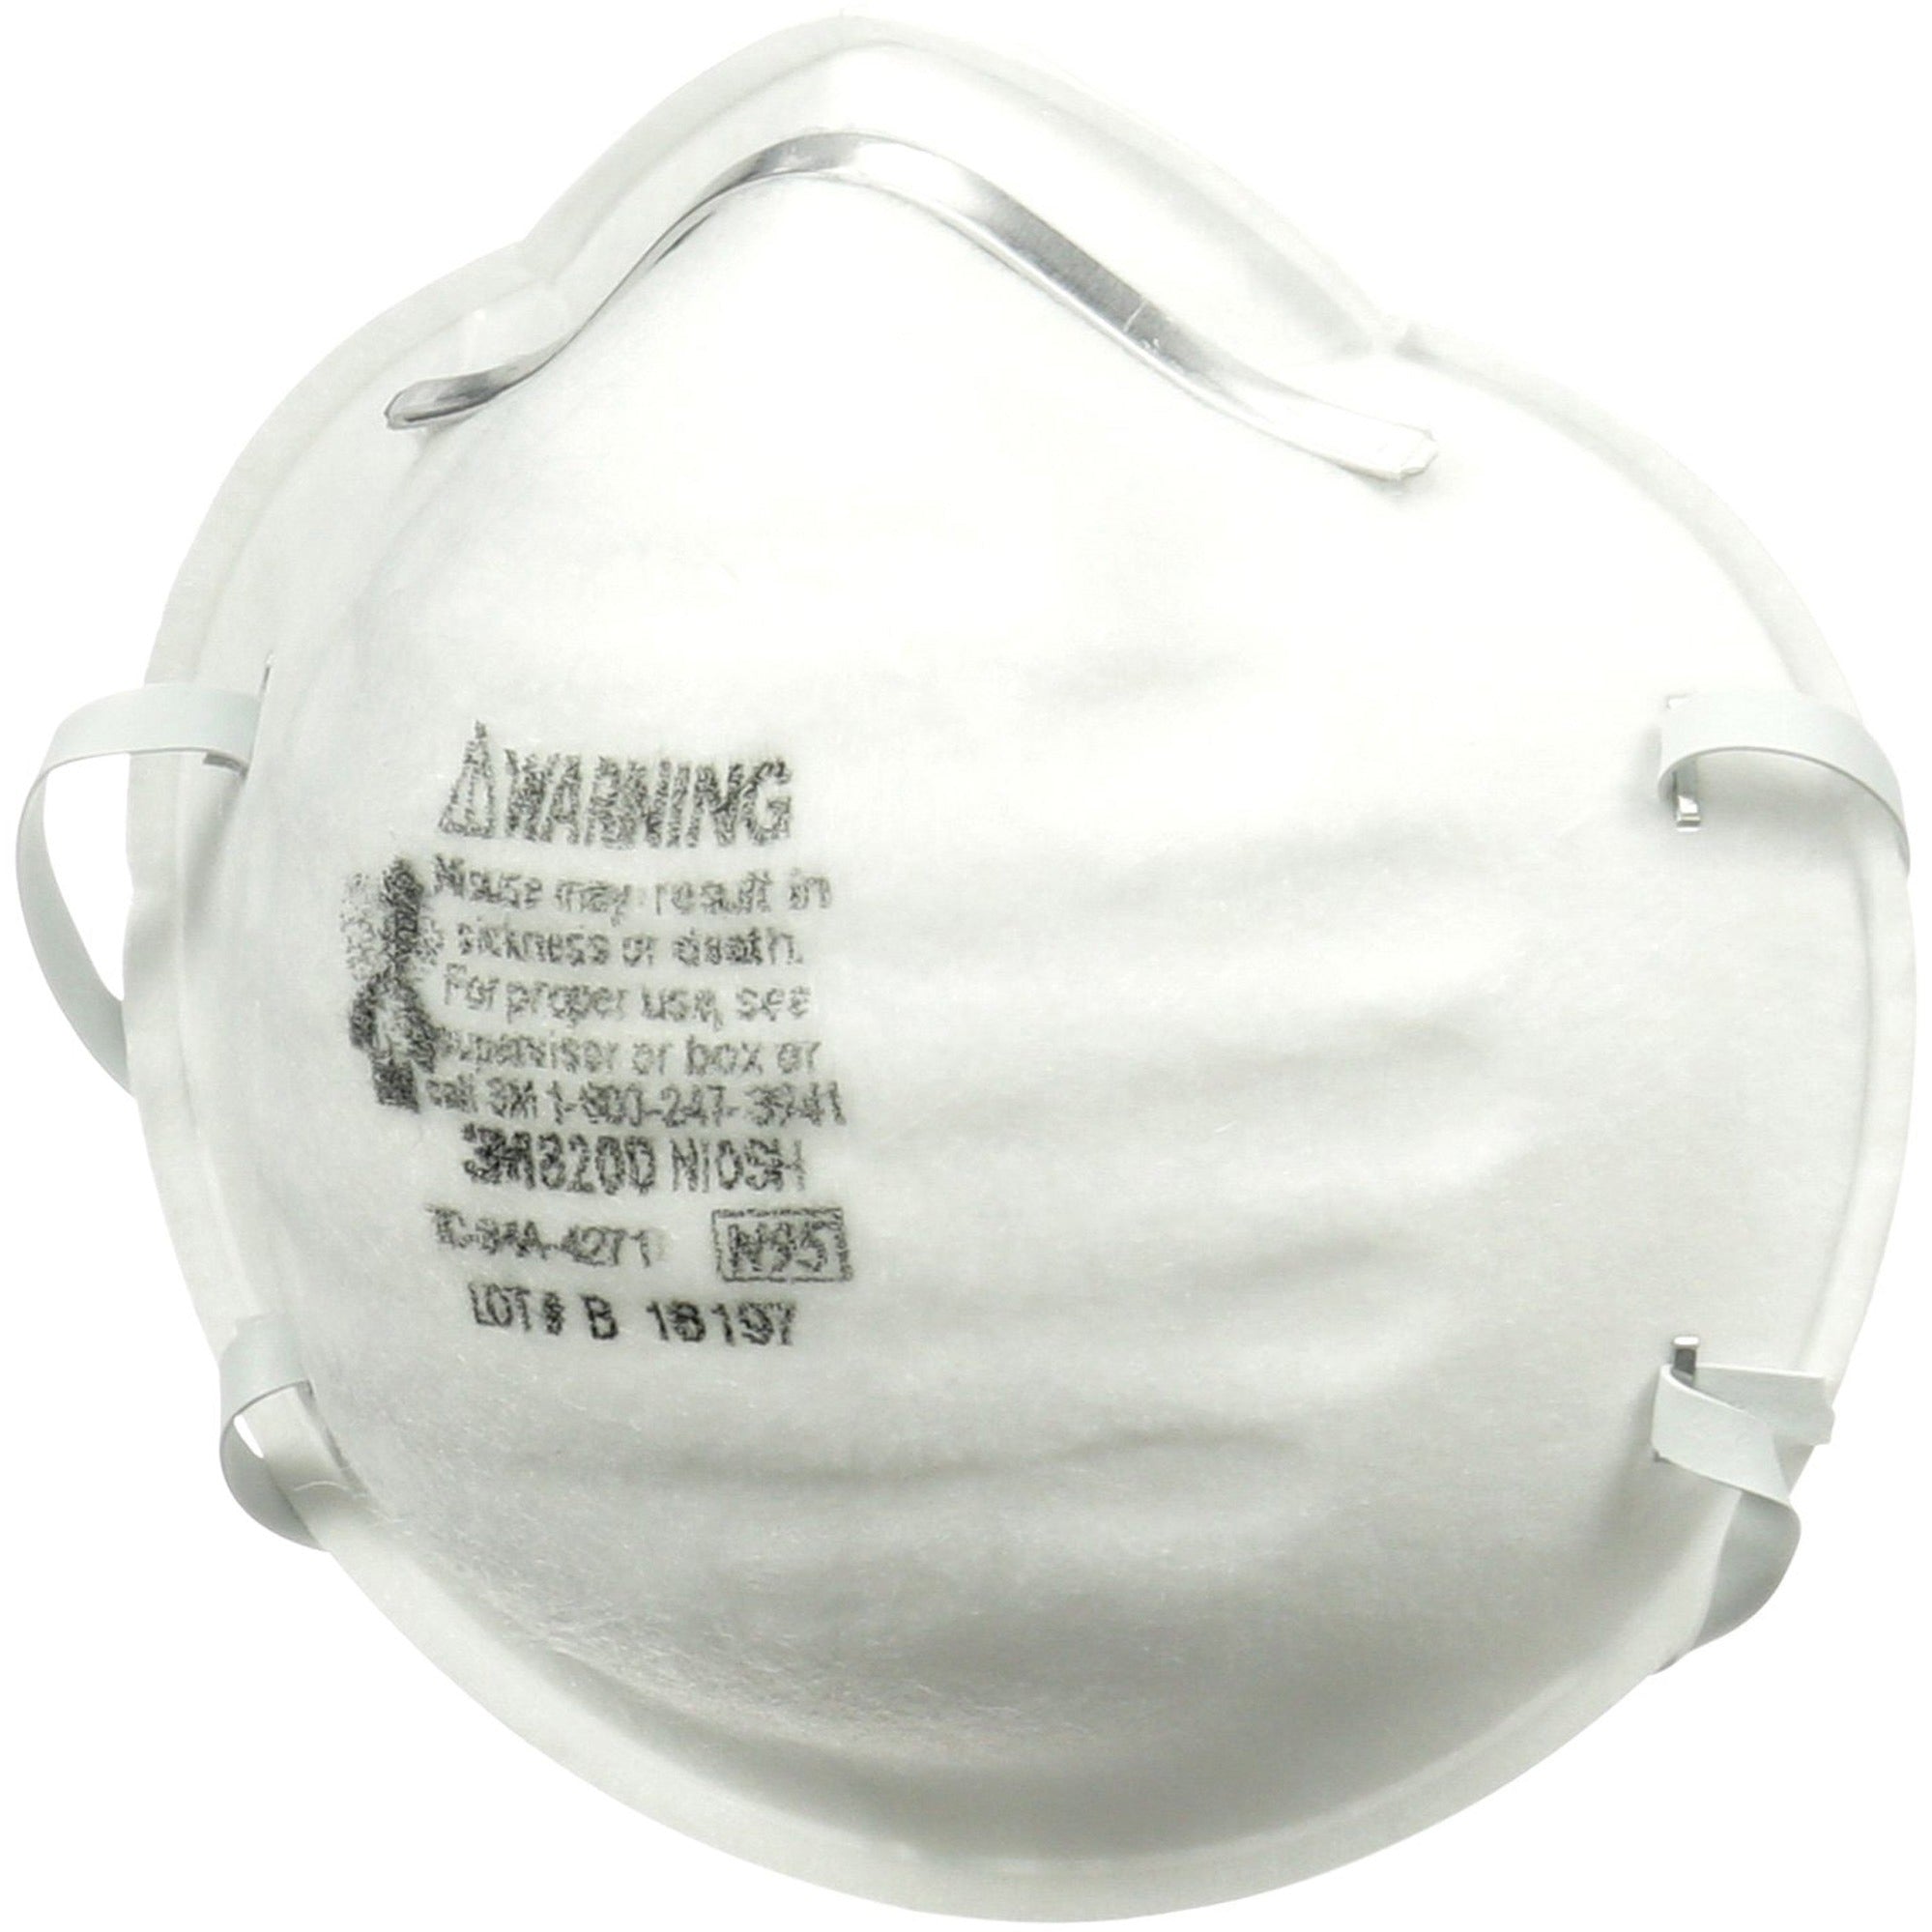 3m-n95-particle-respirator-8200-masks-2-packs-airborne-particle-mold-dust-granular-pesticide-allergen-protection-white-disposable-lightweight-stretchable-adjustable-nose-clip-12-carton_mmm8200h2c - 2